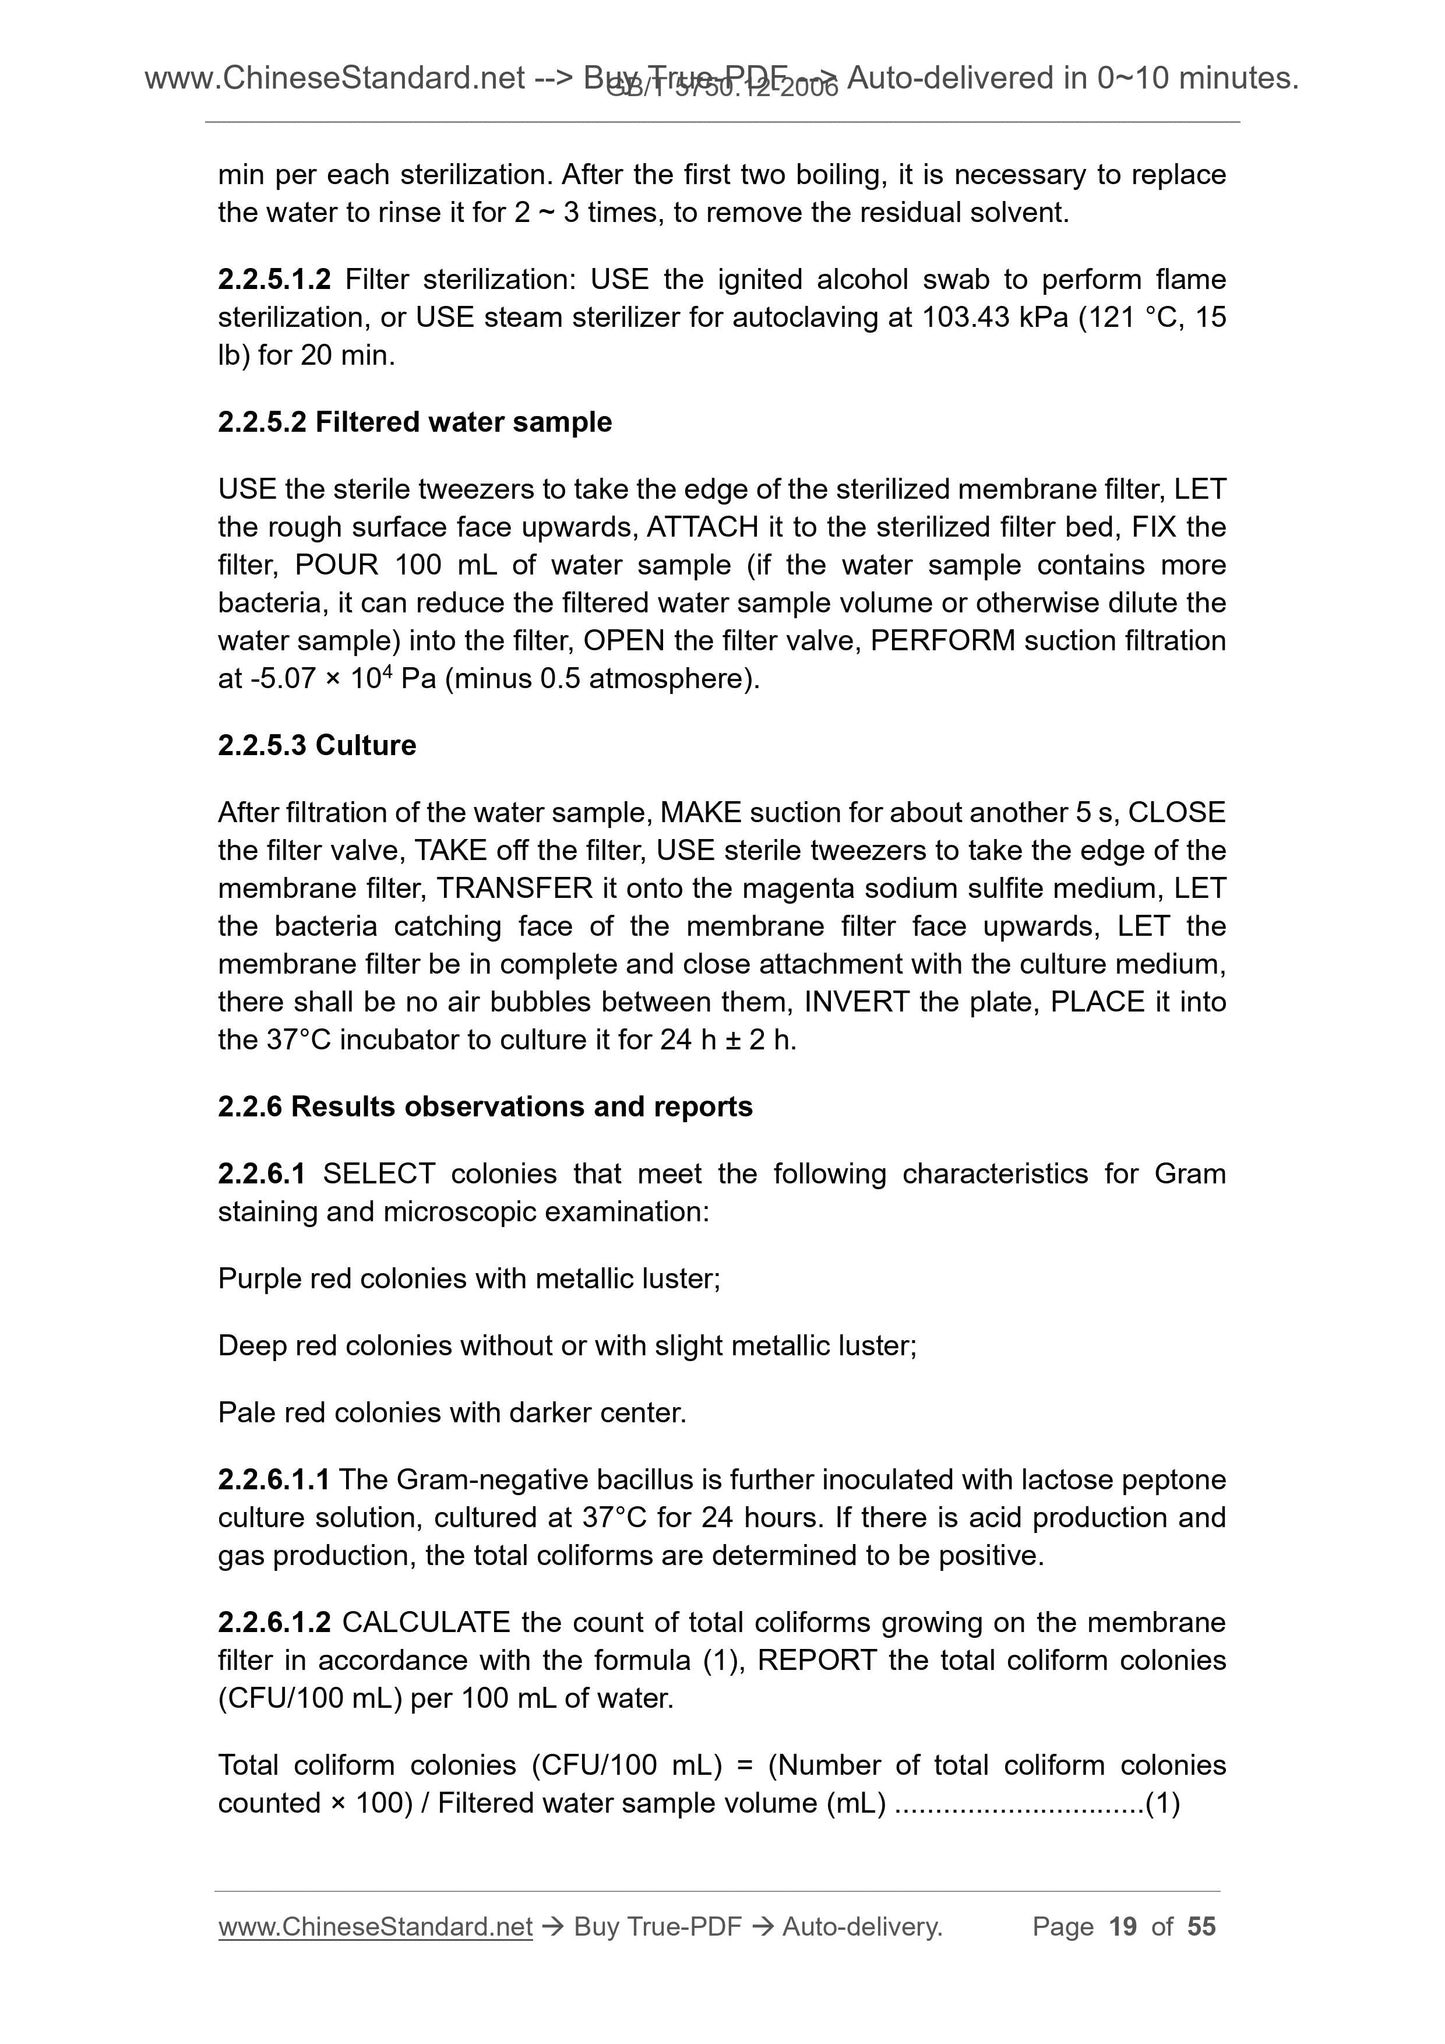 GB/T 5750.12-2006 Page 7